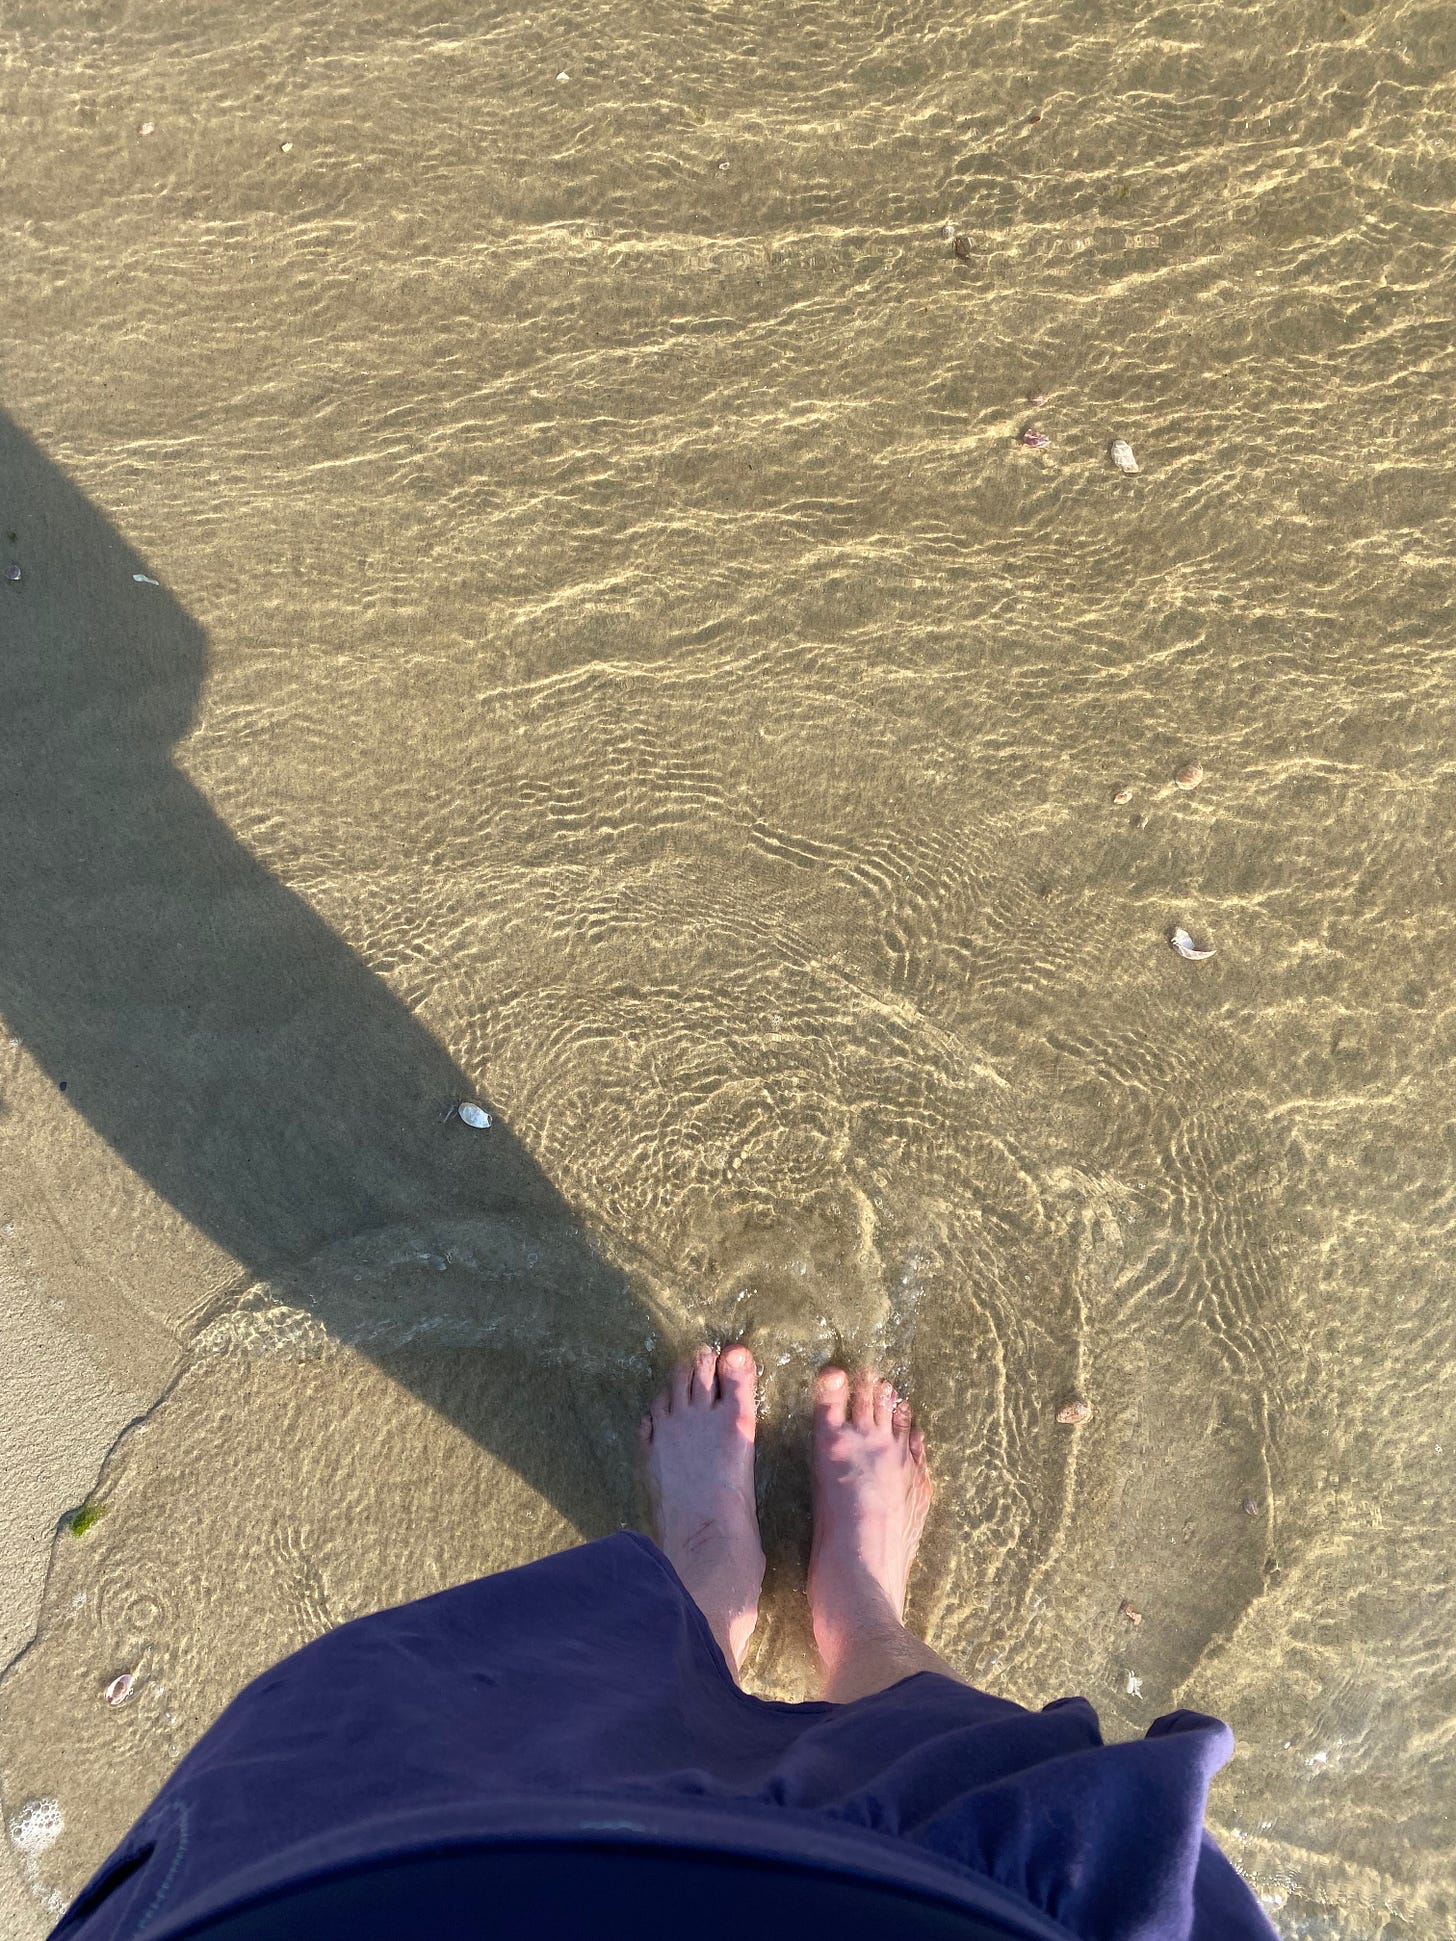 A view from above of my bare feet in a swirling wave of clear water on the beach. I’m wearing a short purple skirt and my legs make a long dark shadow.